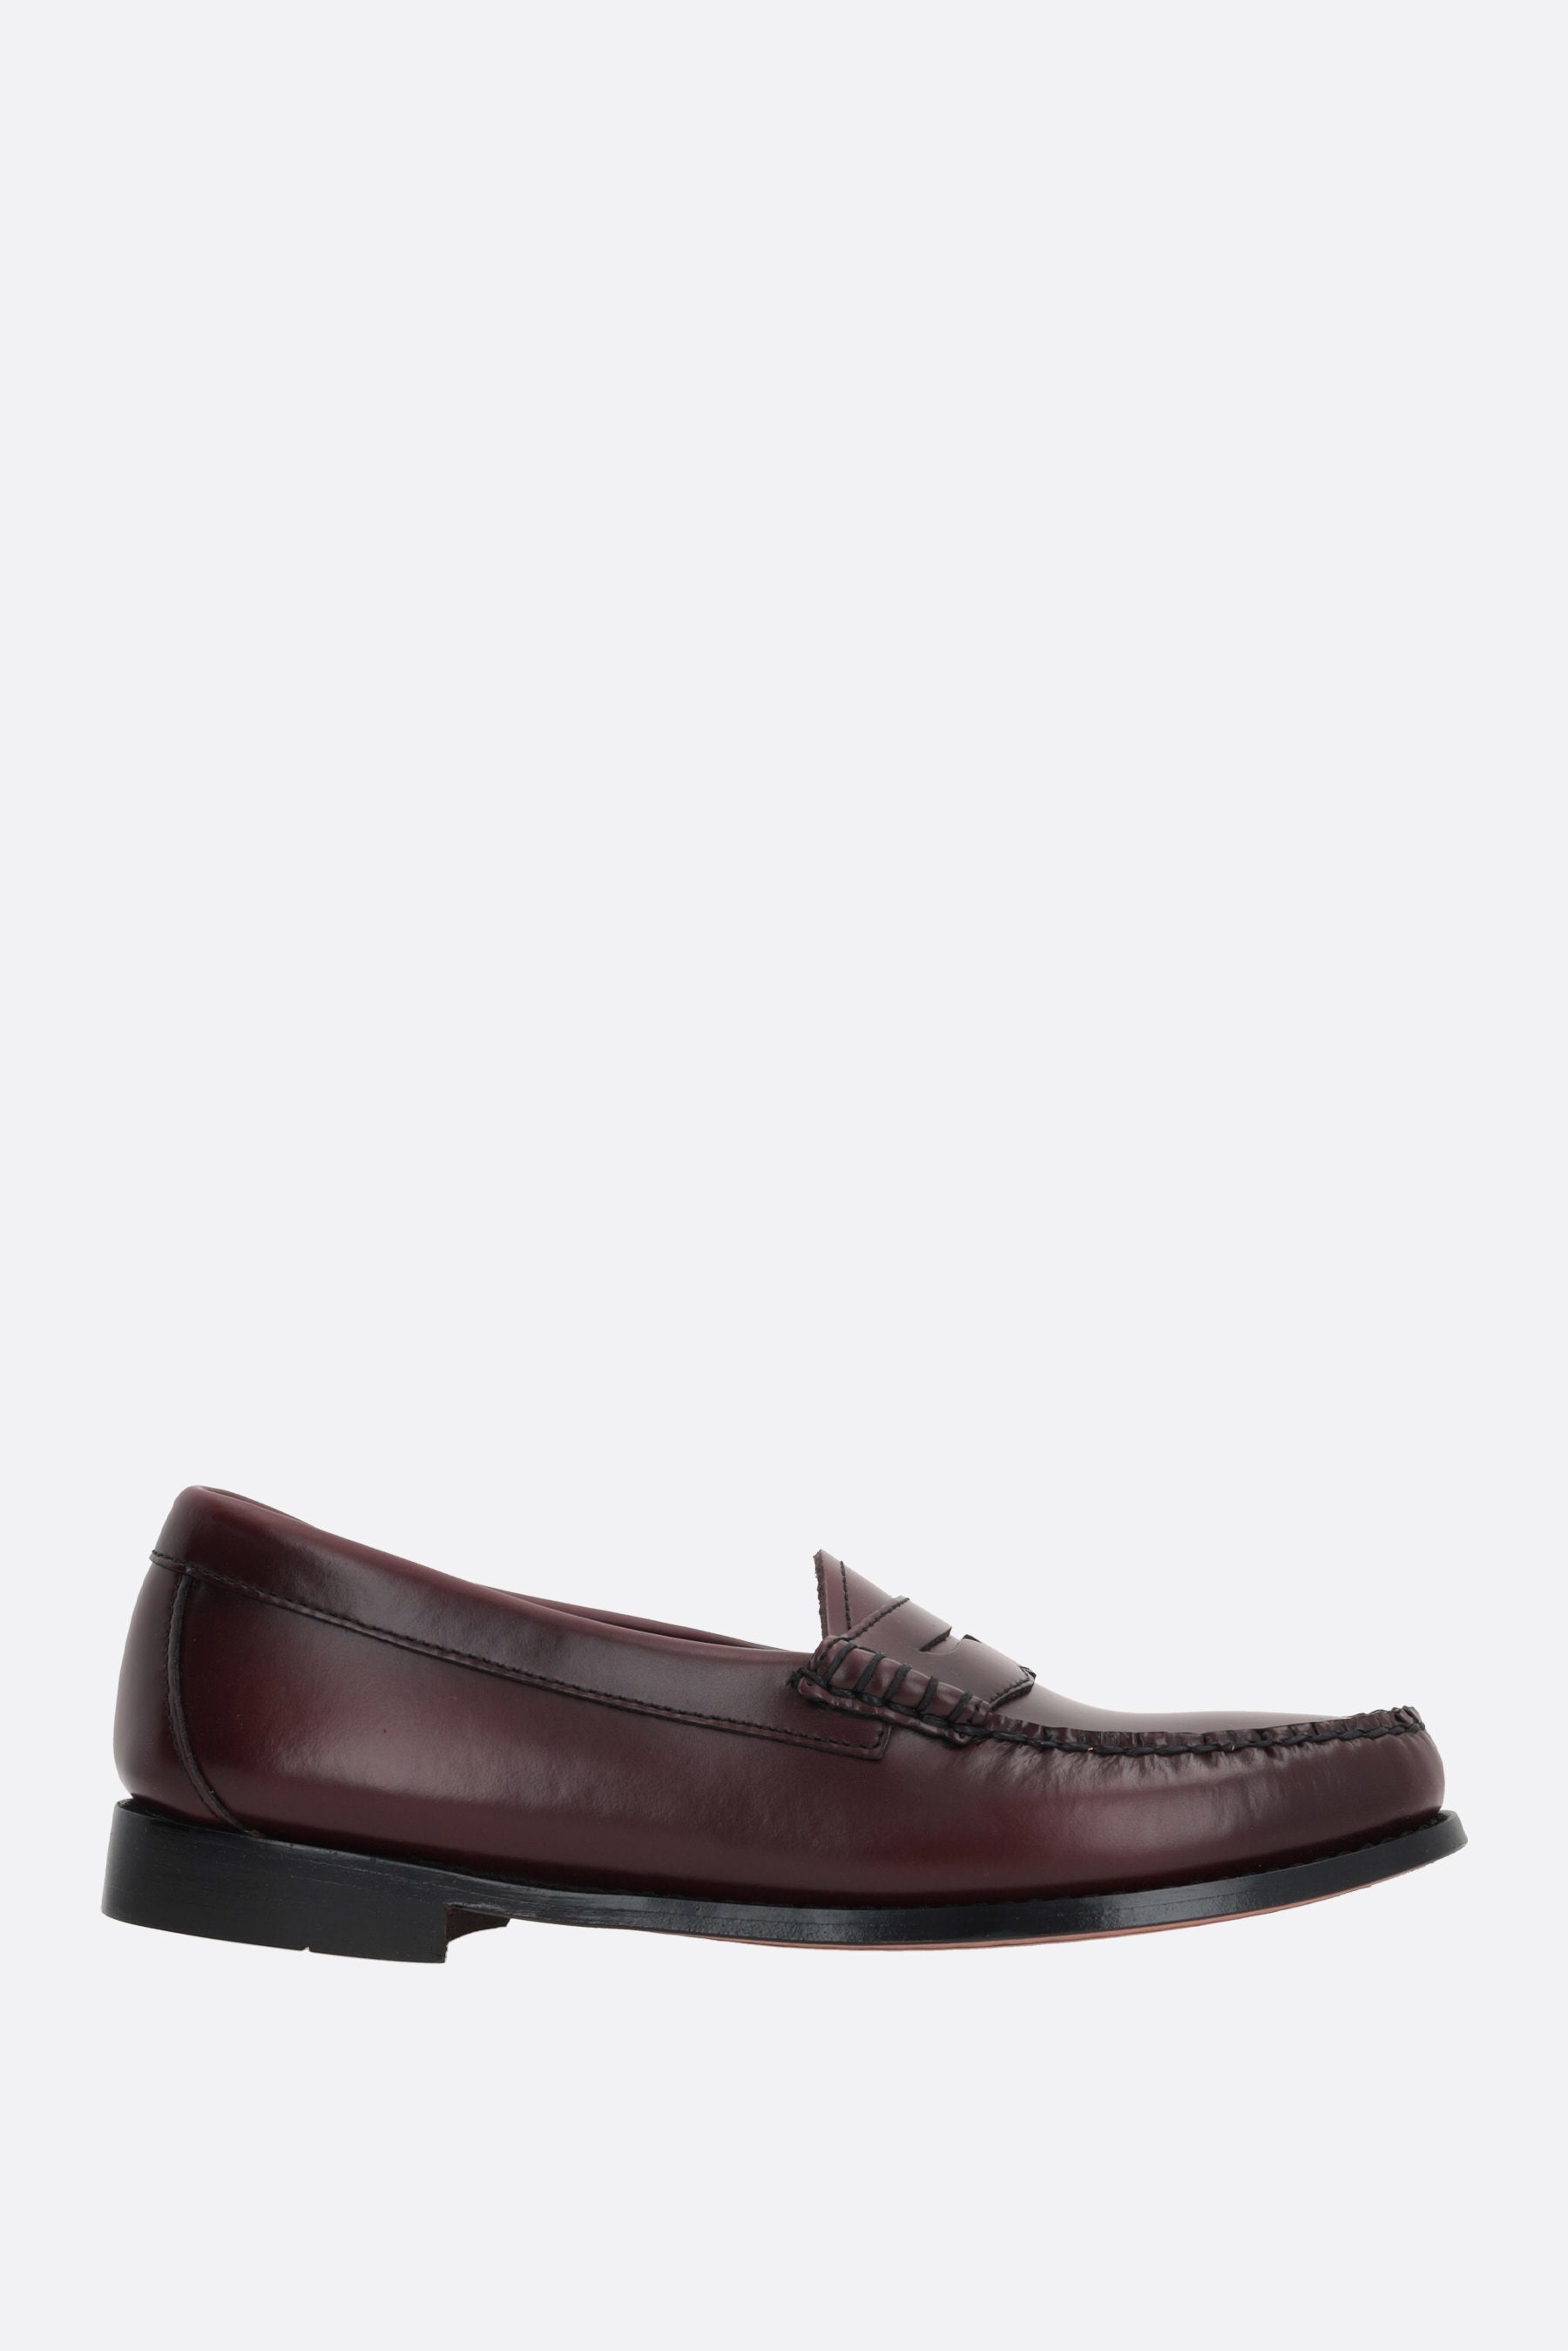 Weejuns Heritage polished leather penny loafers